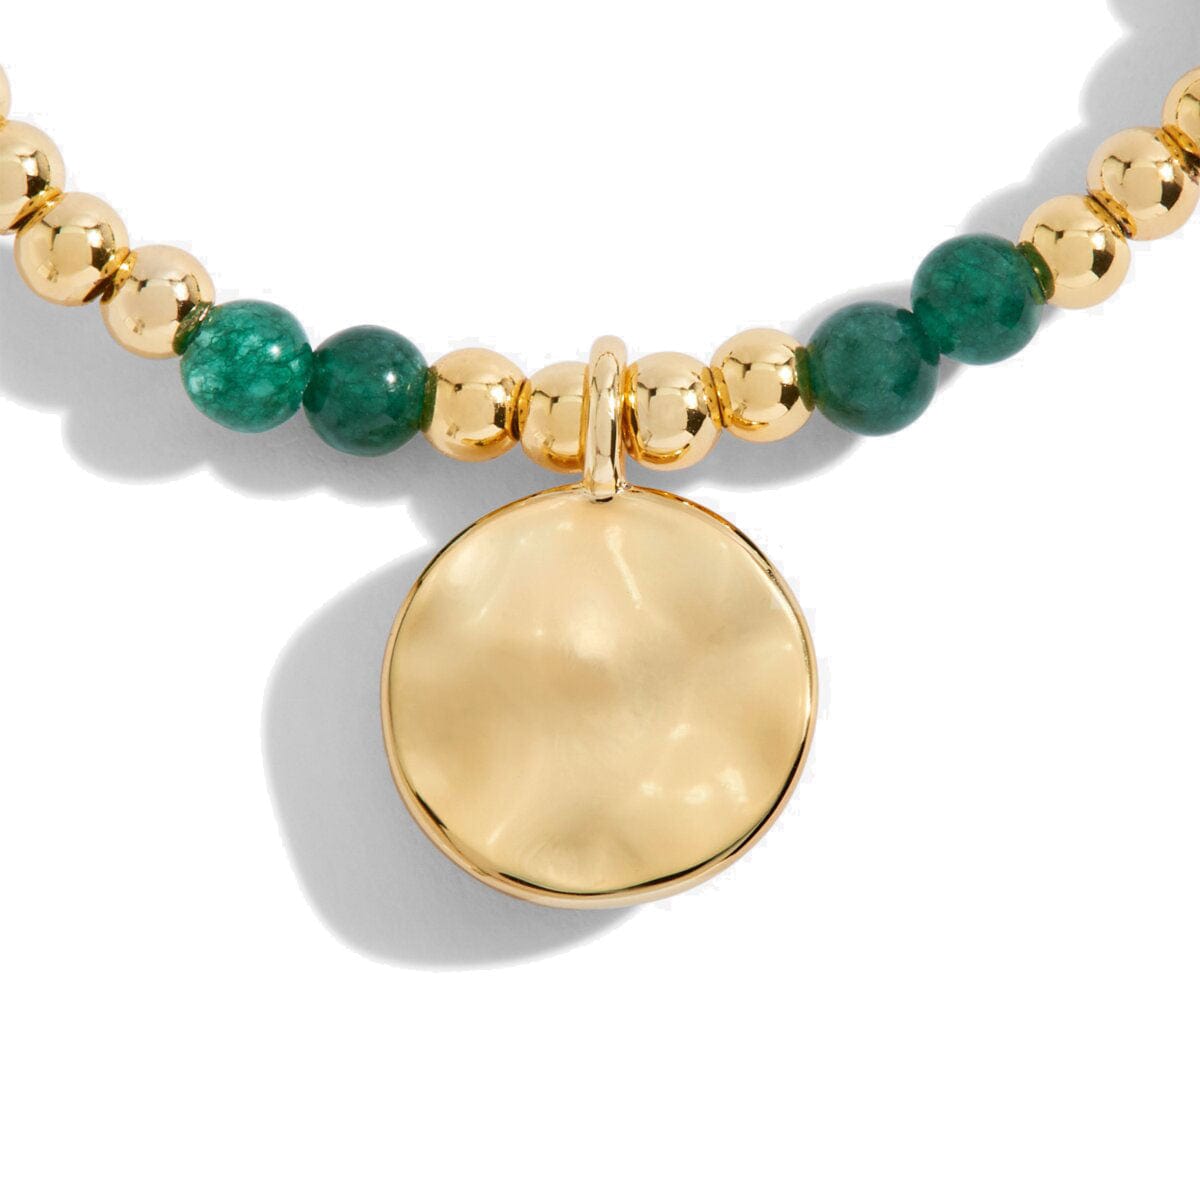 Joma Jewellery Bracelet Joma Jewellery Bracelet - A Little Gold Birthstone - May - Green Agate